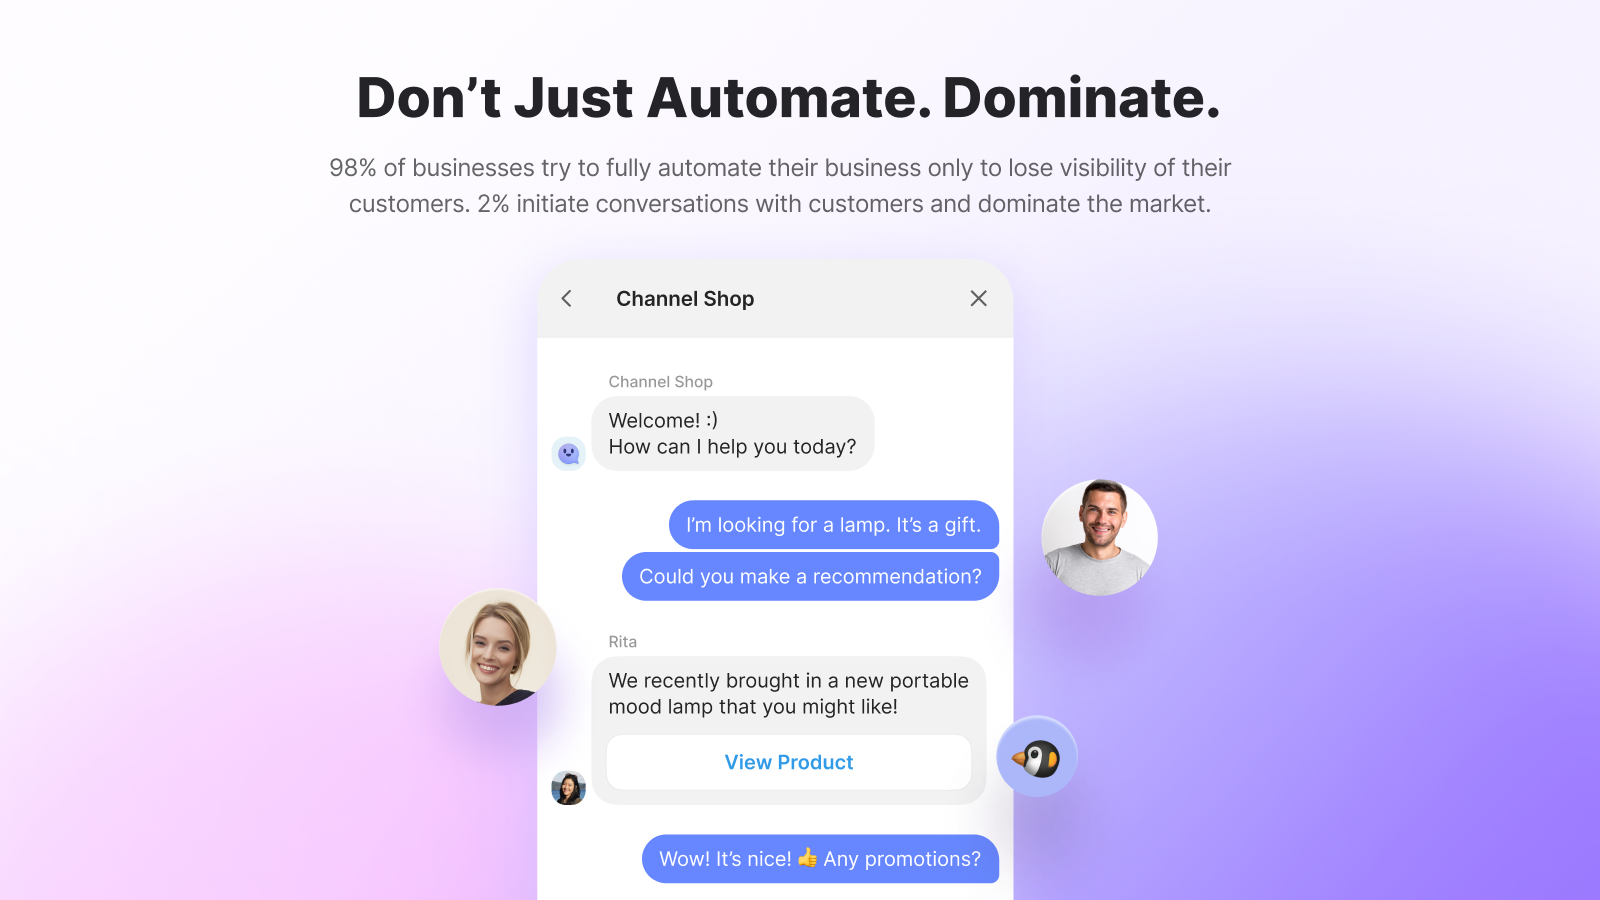 Donâ€™t Just Automate. Dominate. - improve visibility of customers